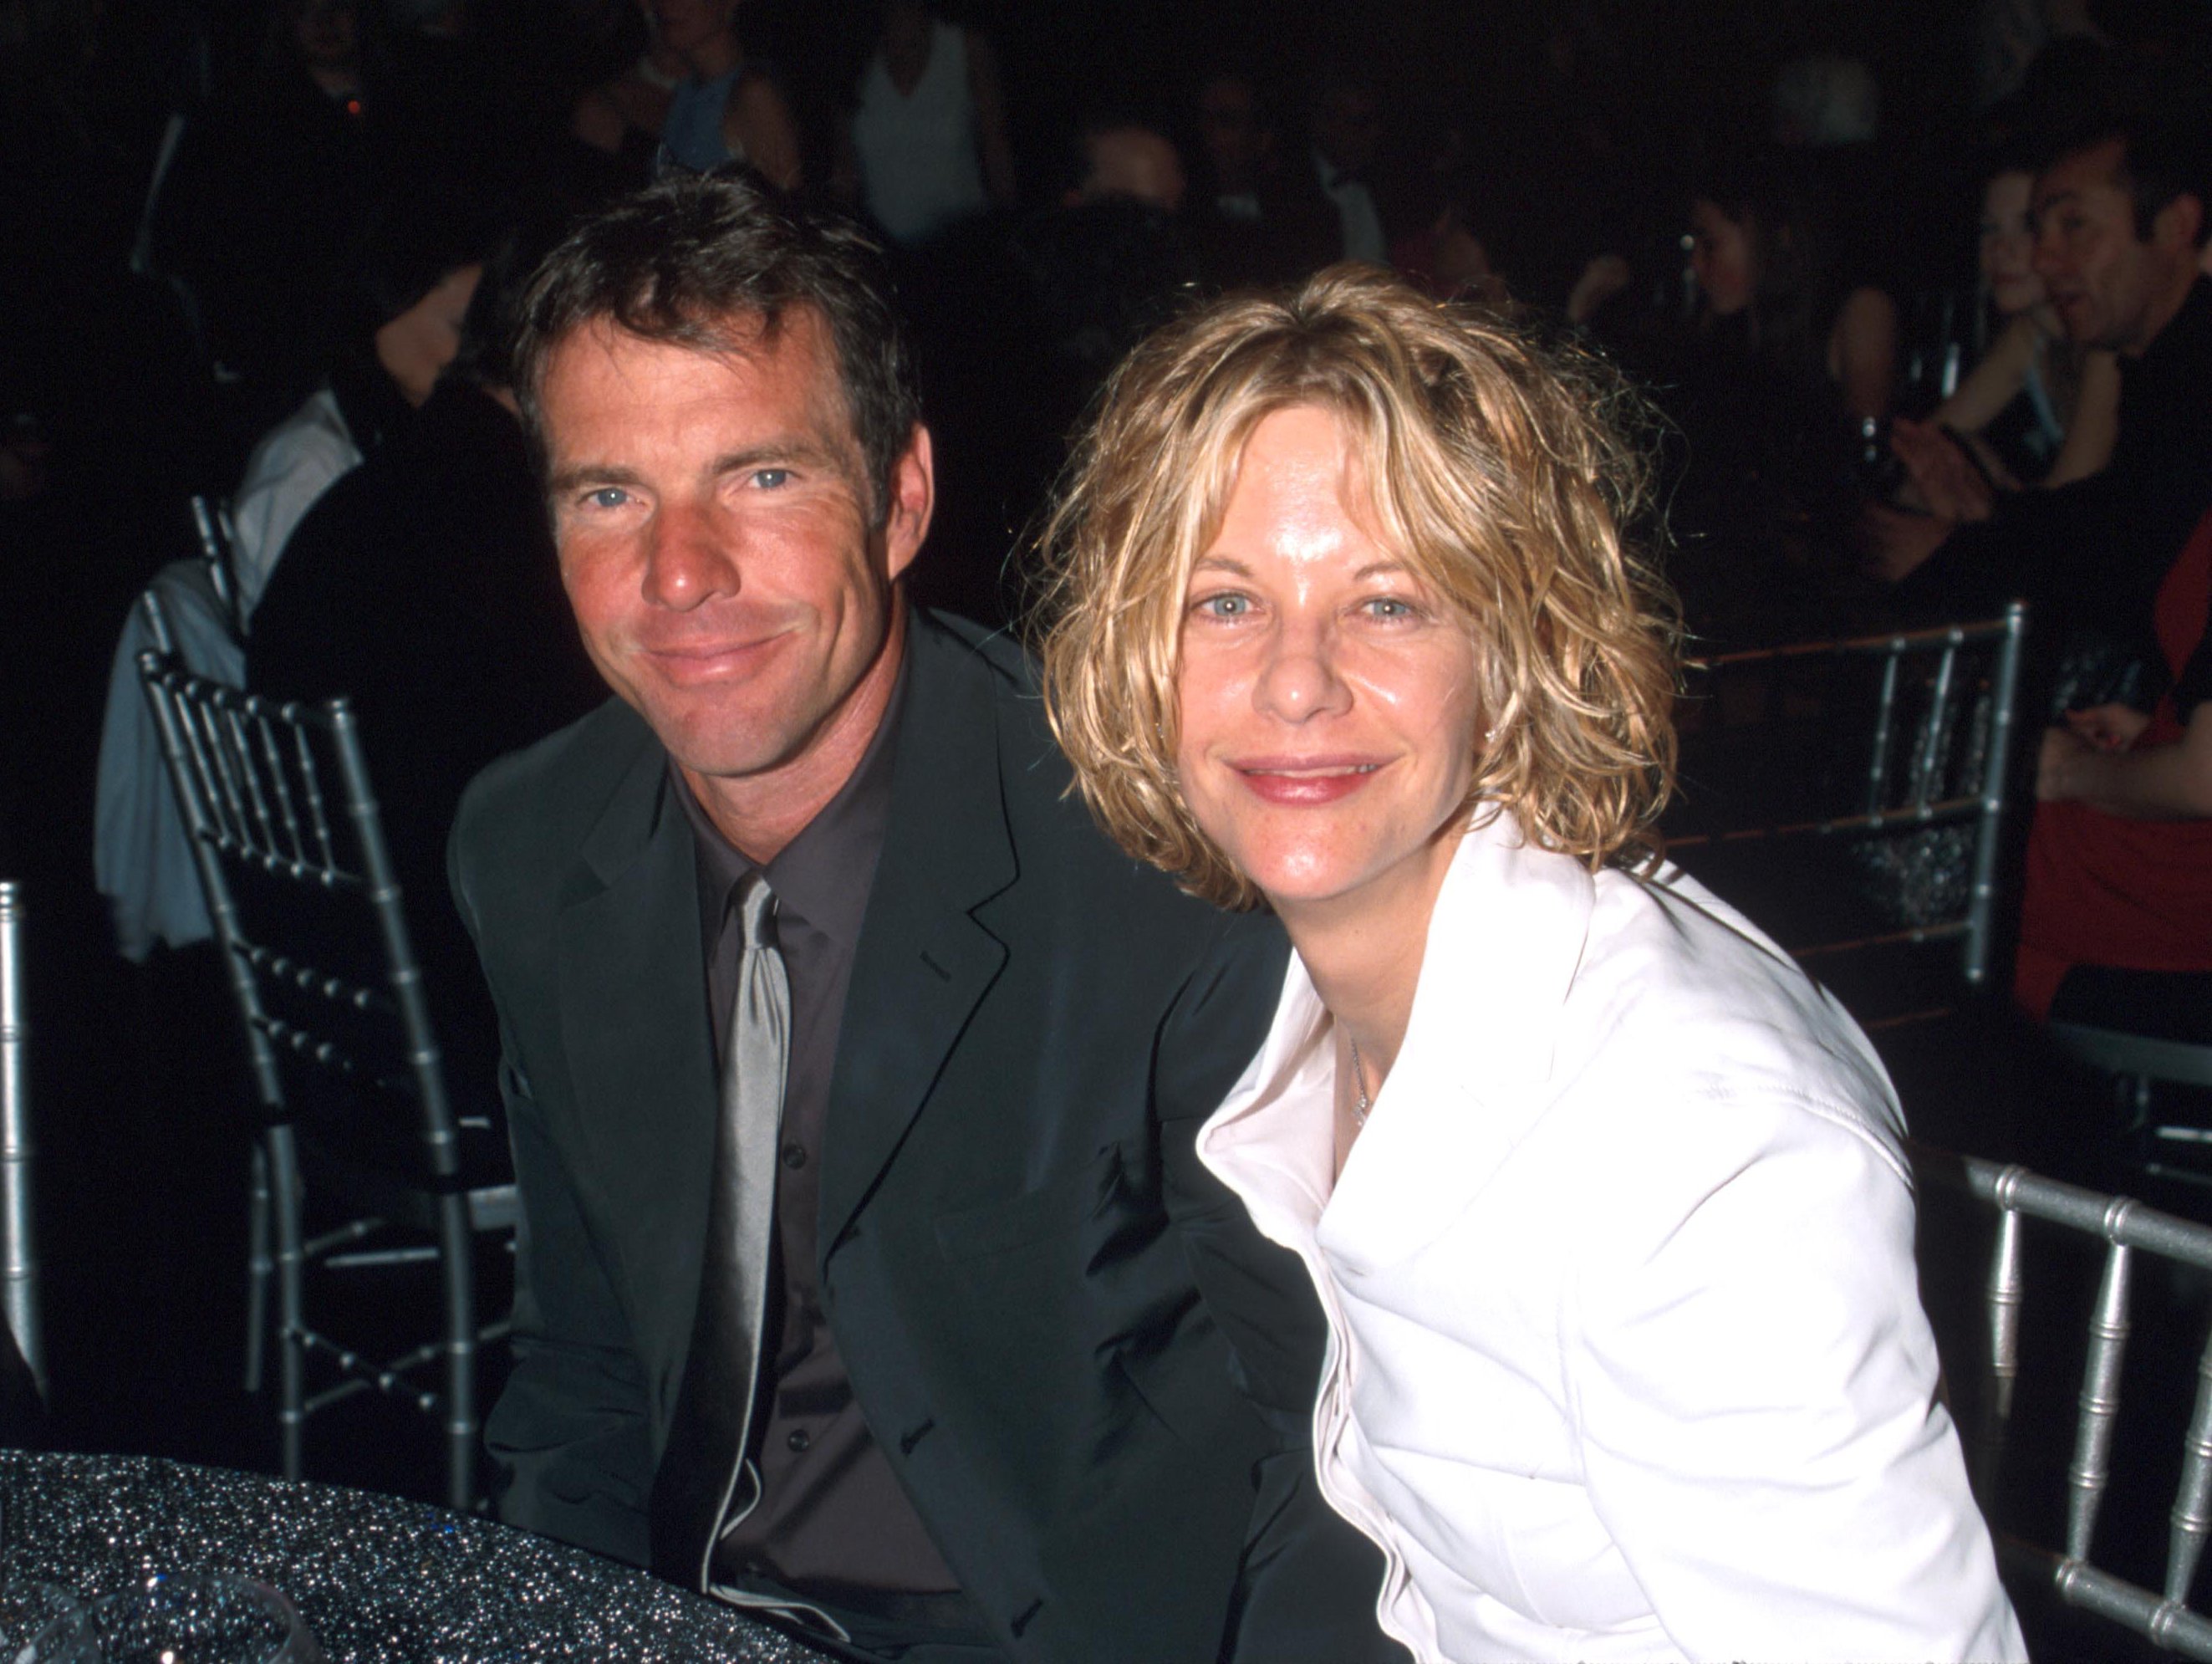 Mark Meg Ryan's 60th birthday with a look at her life and career in photos